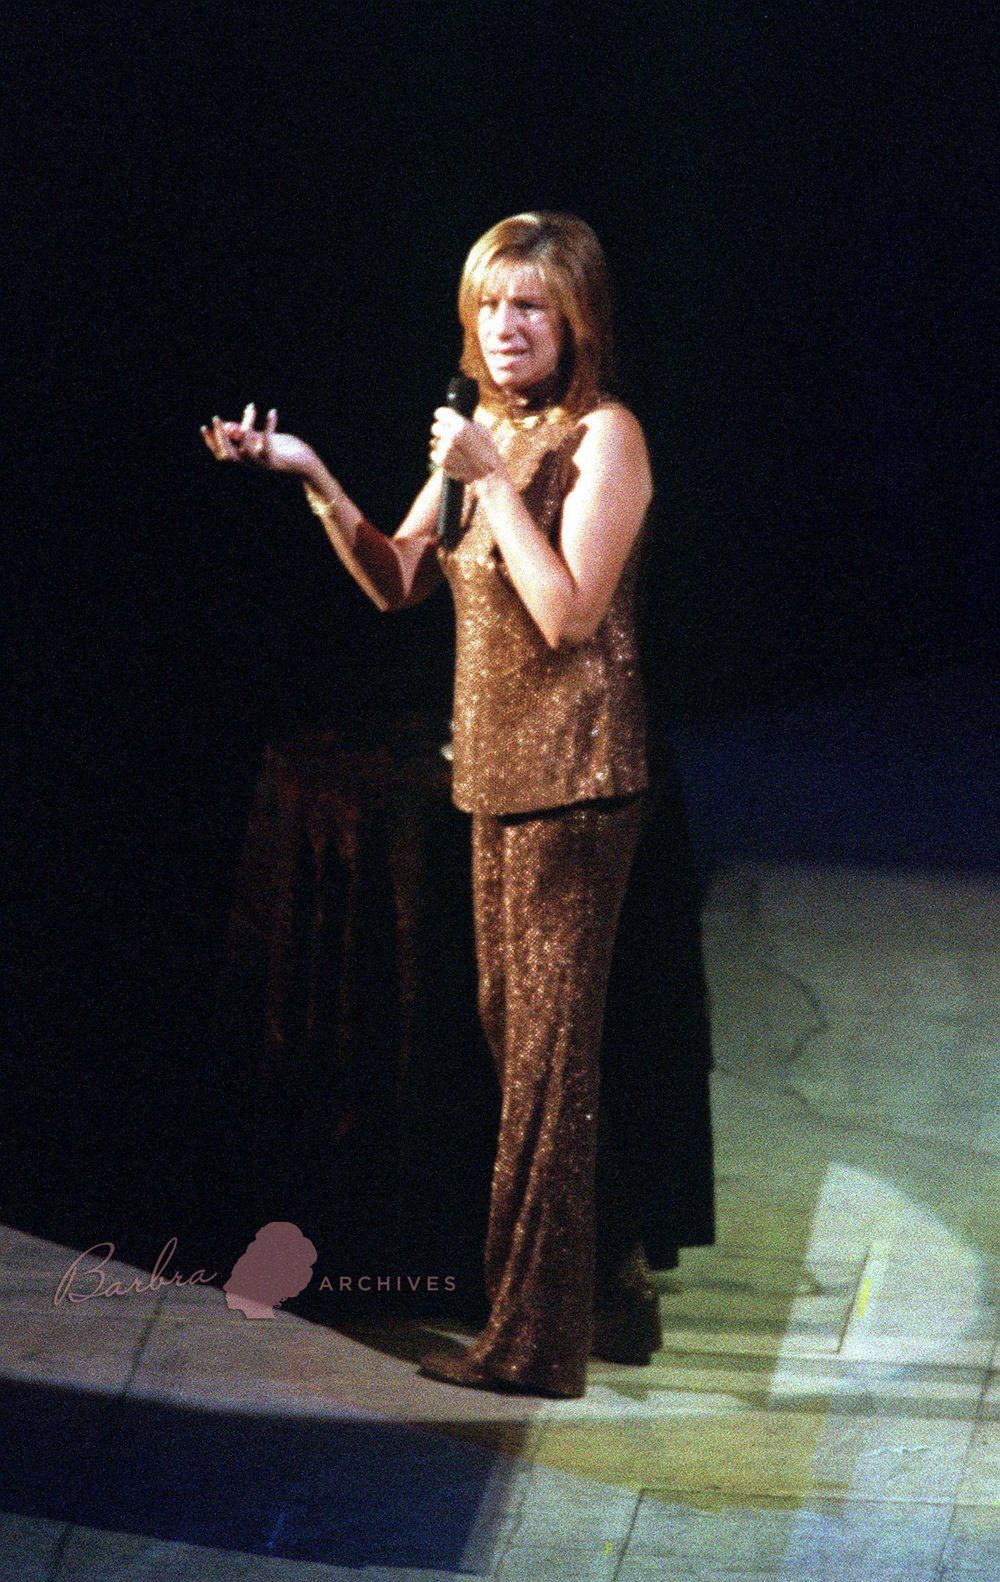 Streisand in New York wearing copper-colored version of her first act pantsuit.